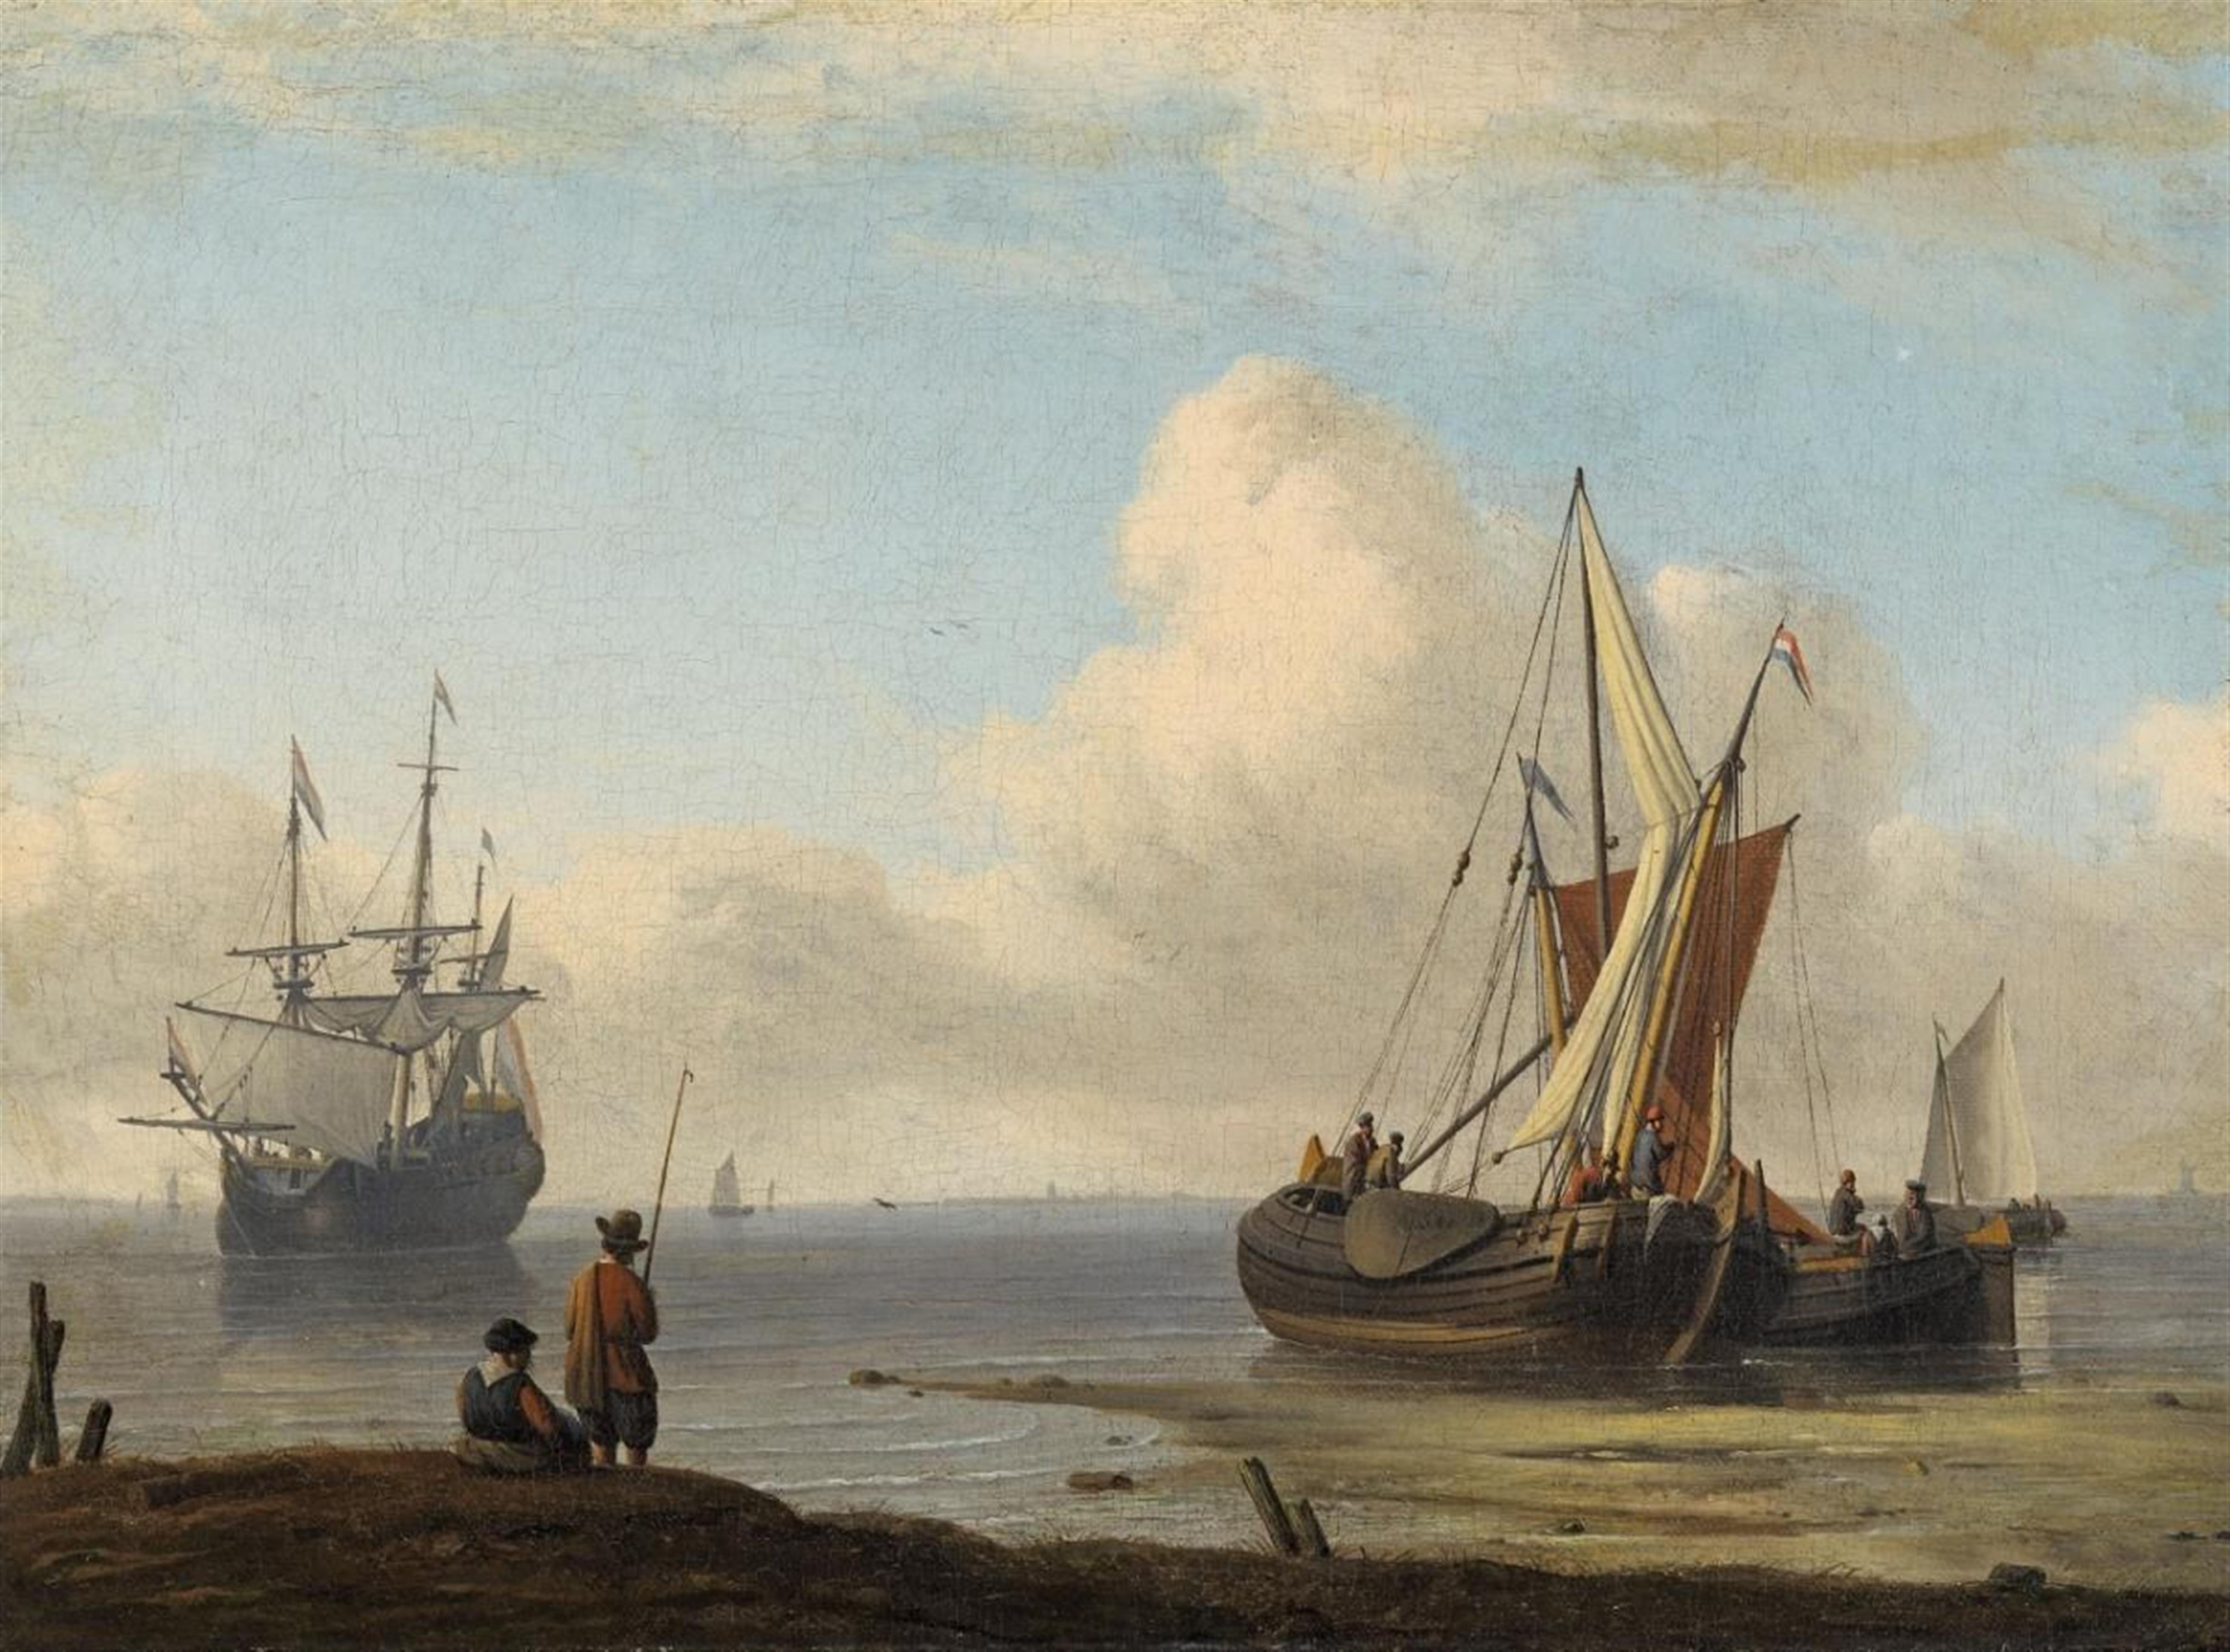 Aernout Smit - COASTAL LANDSCAPE WITH SAILING SHIP AND BOATS - image-1